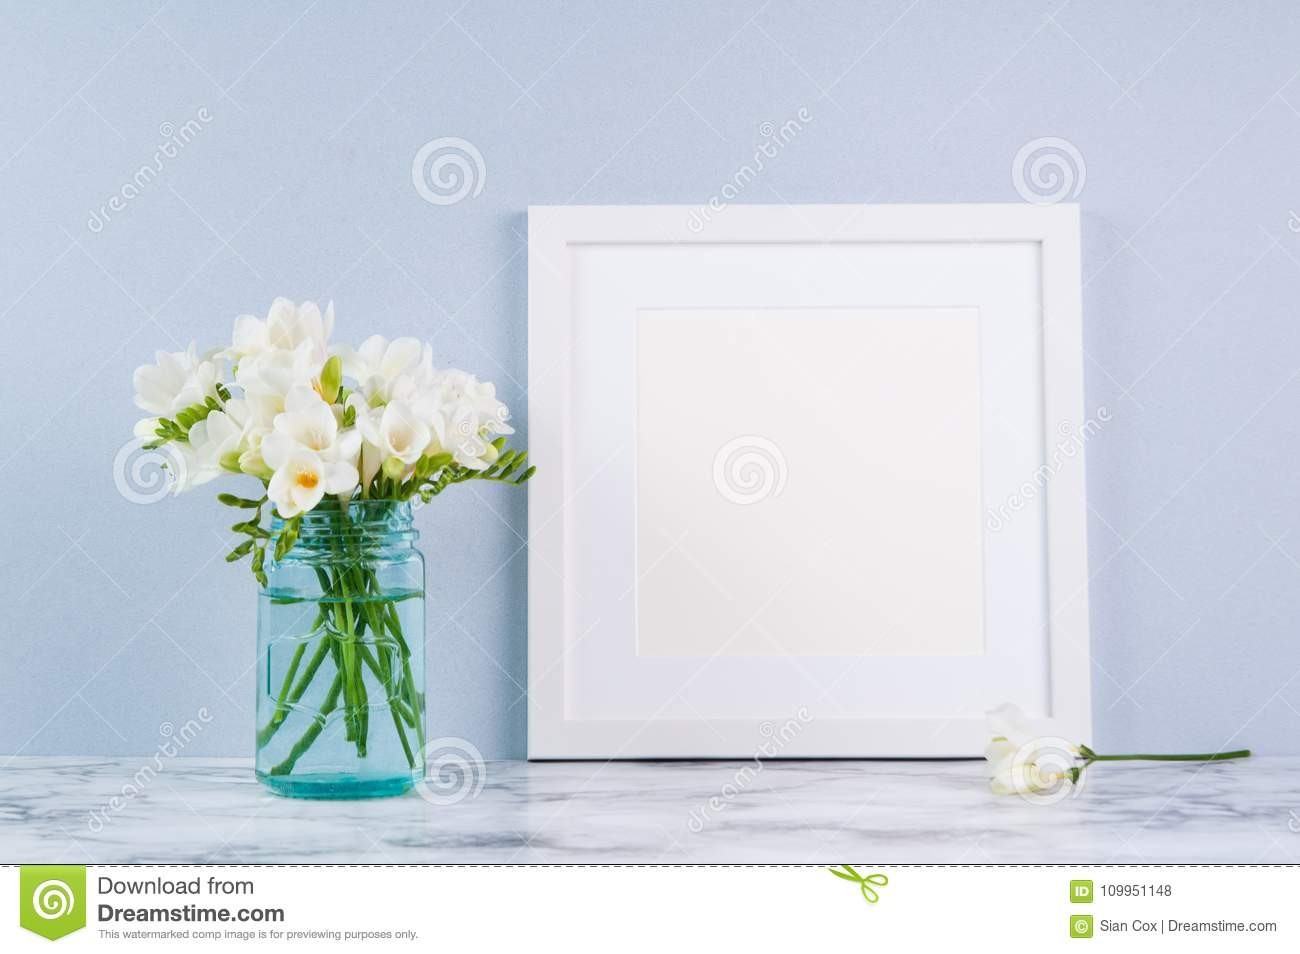 14 Fashionable Calla Lily Tall Vase 2024 free download calla lily tall vase of 27 beautiful flower arrangements square vases flower decoration ideas intended for flower arrangements square vases luxury frame mockup stock photo image of mock fres